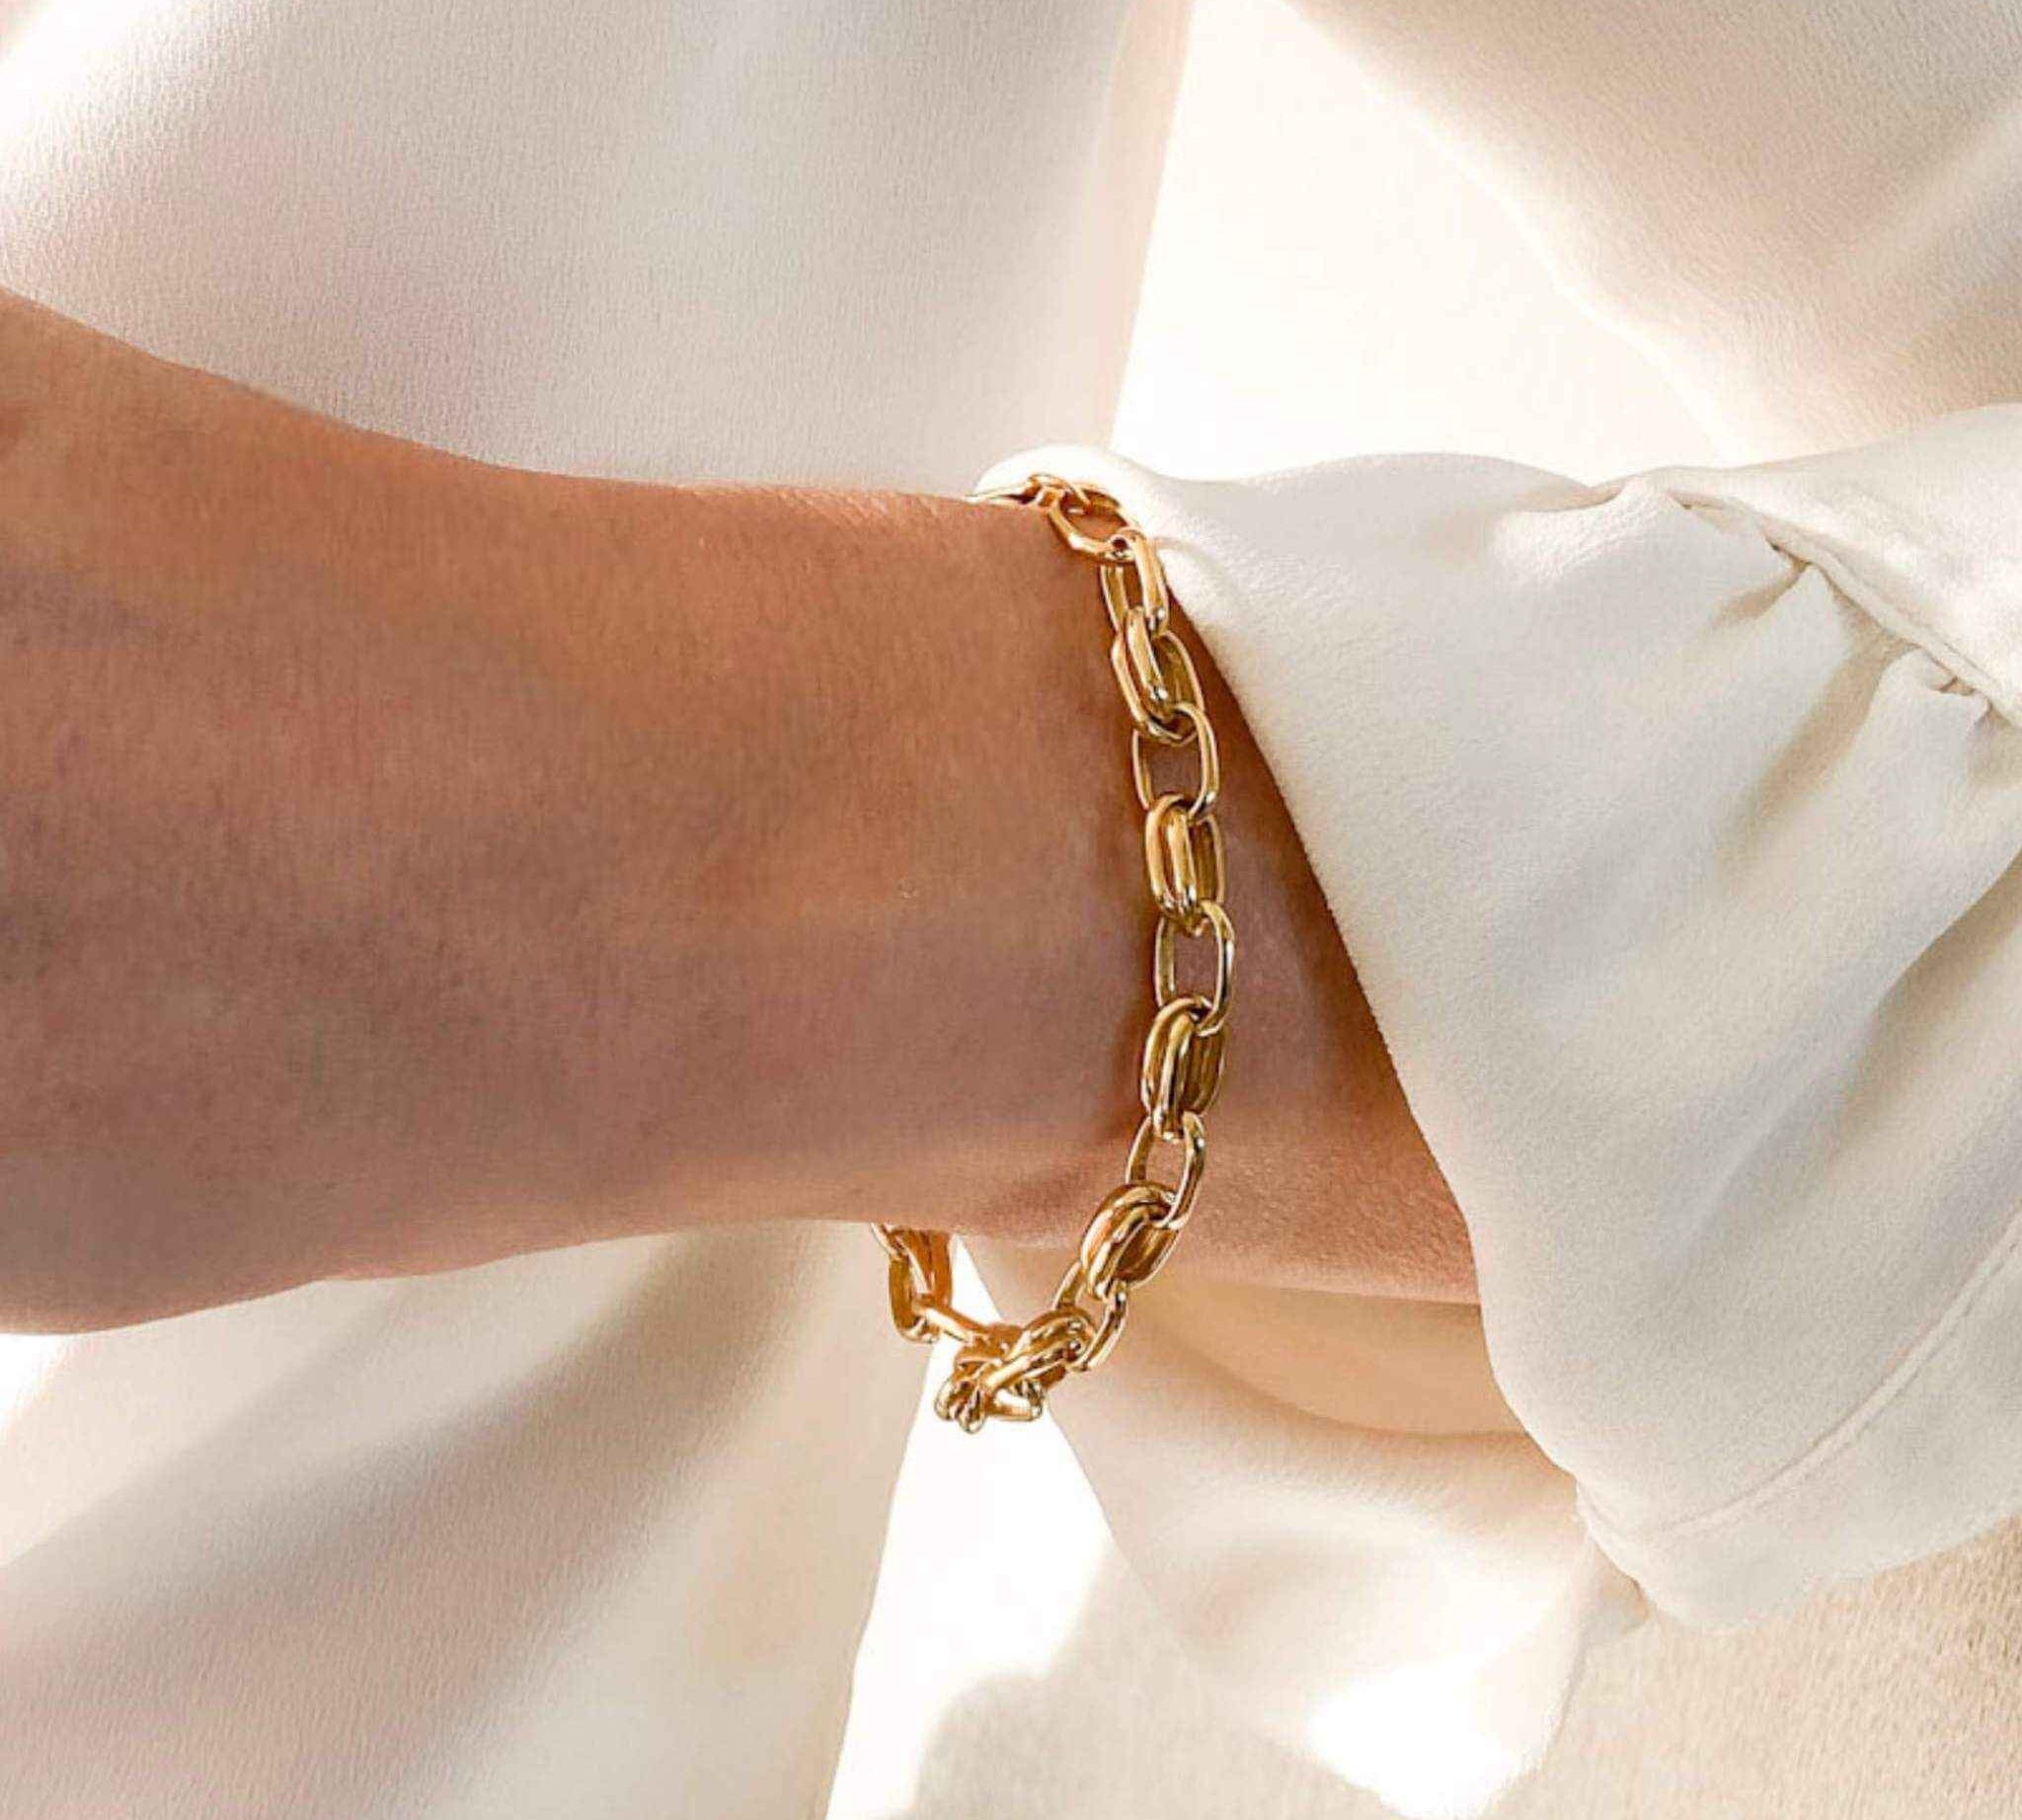 Styled view of the gold-plated Double Link Bracelet showcasing its timeless and refined appeal.